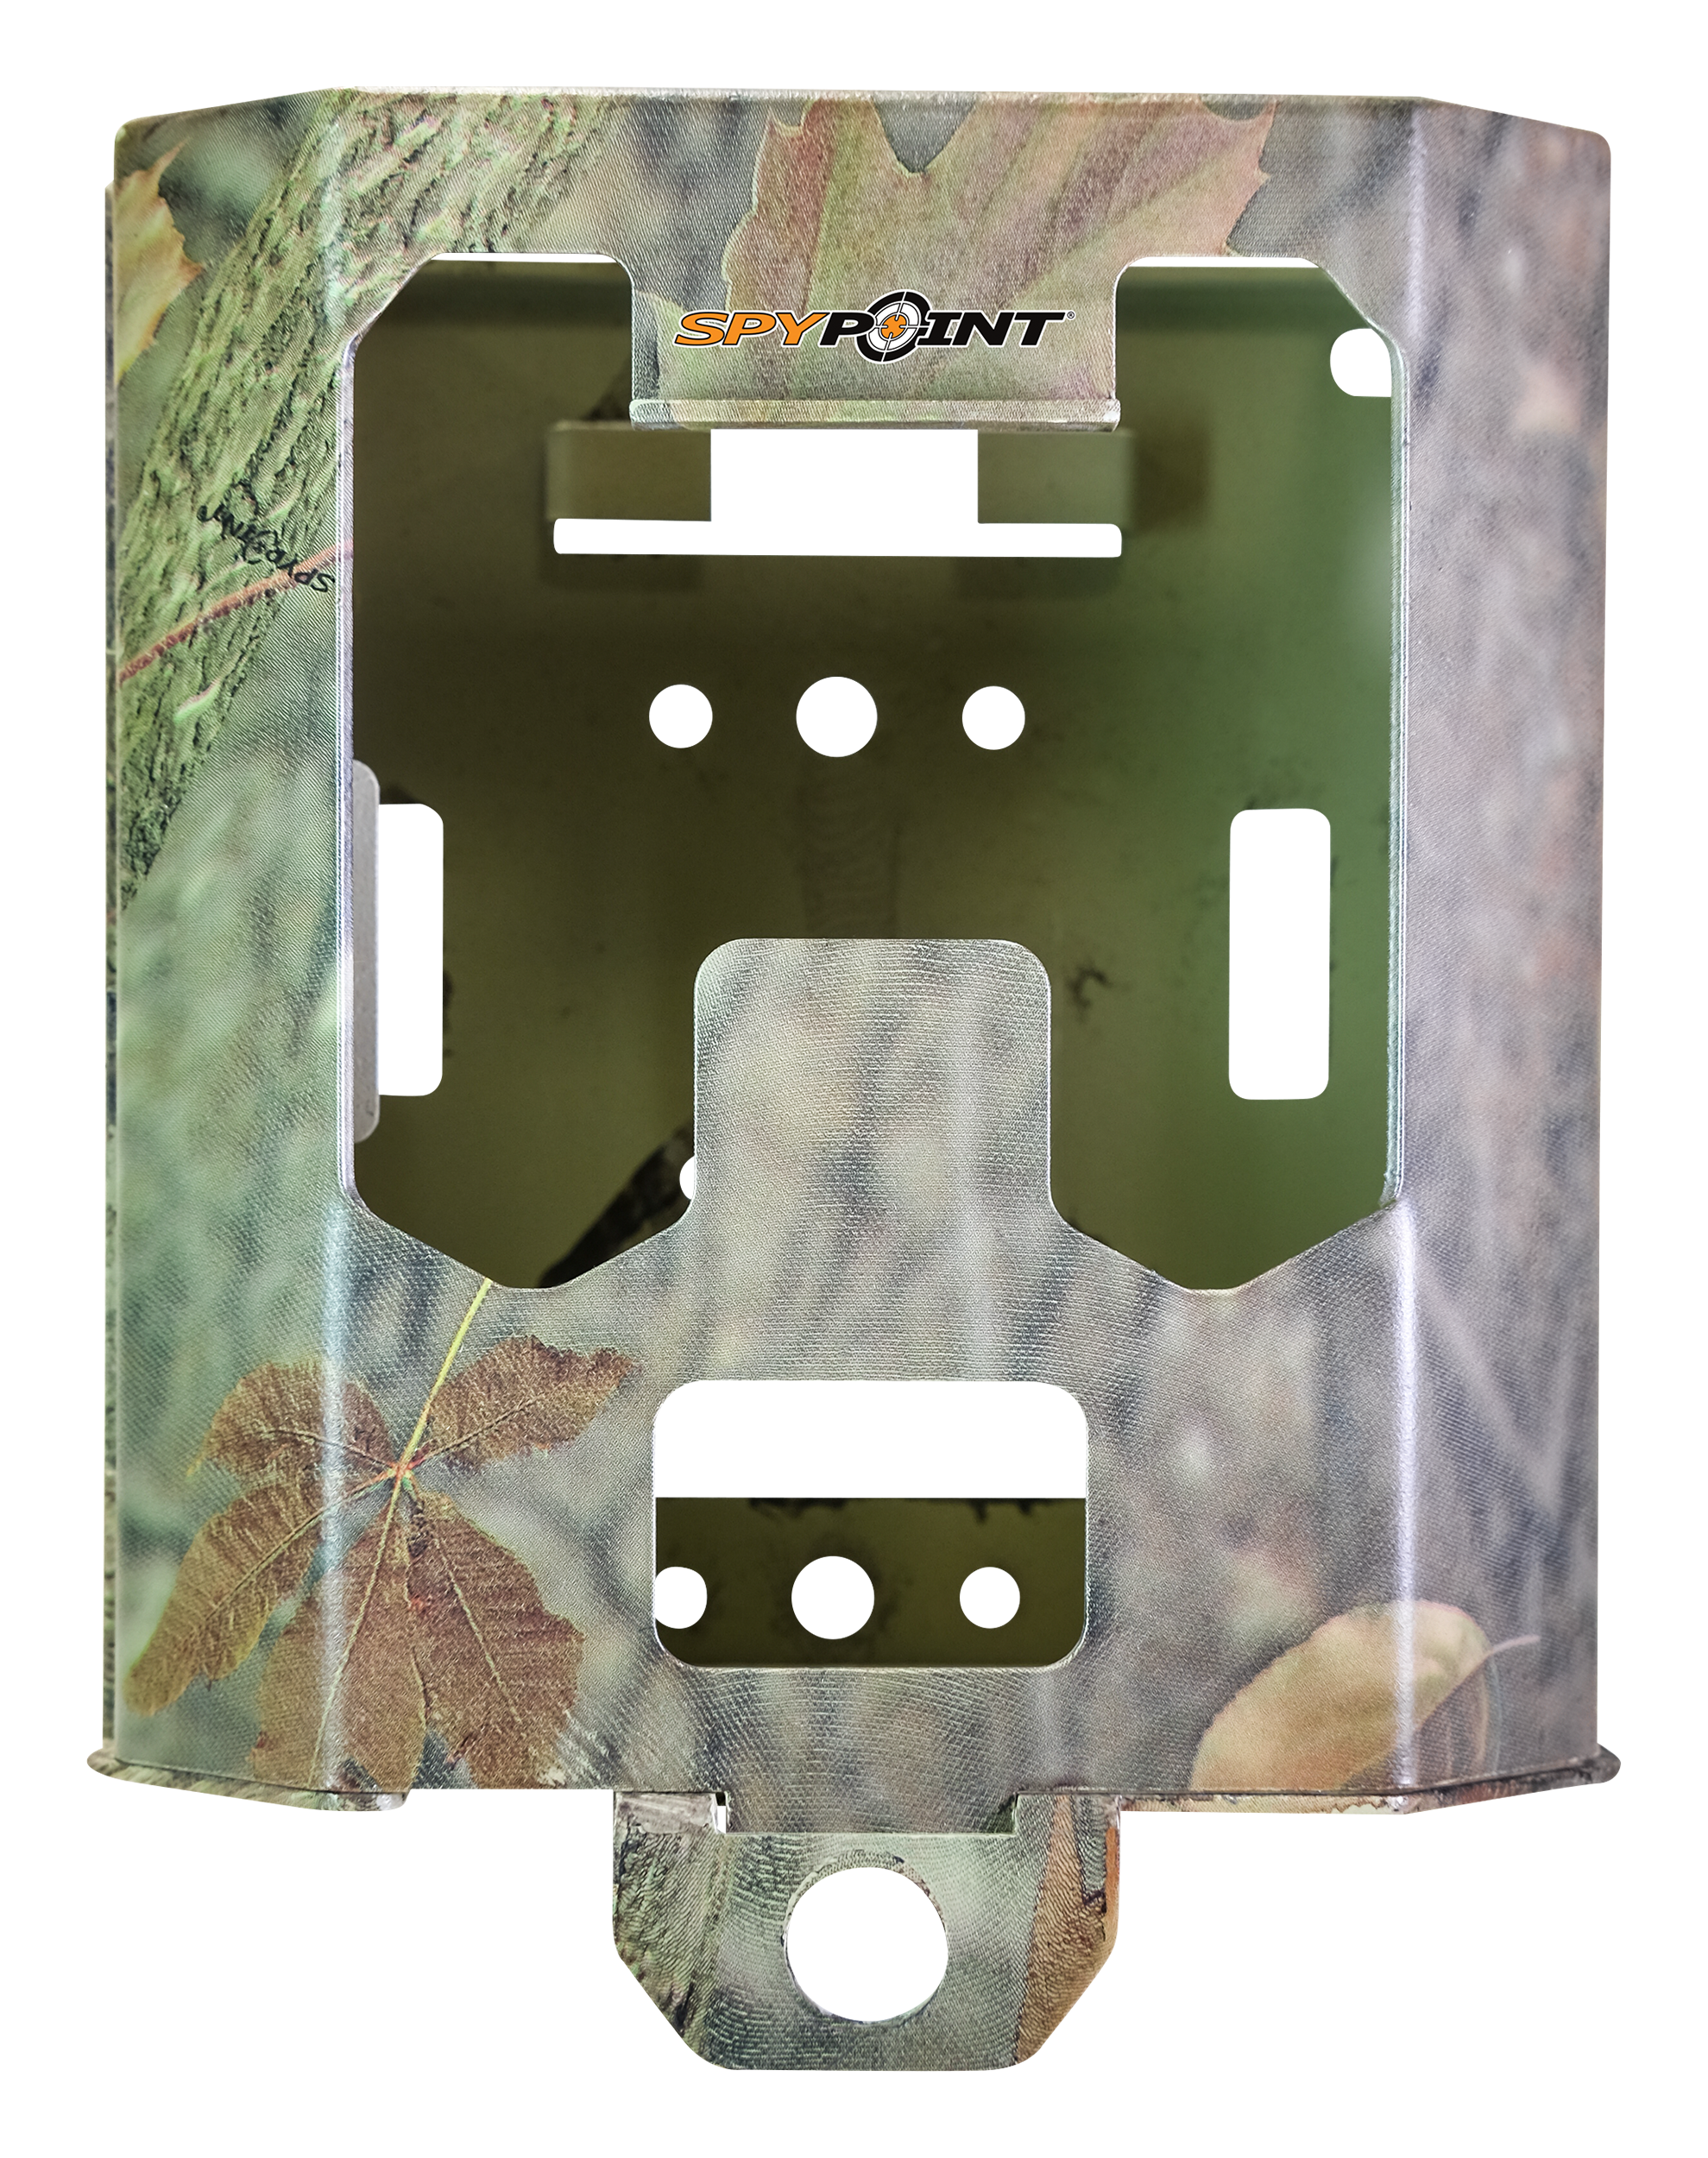 SpyPoint SB-200 Steel Security Box for Game Camera